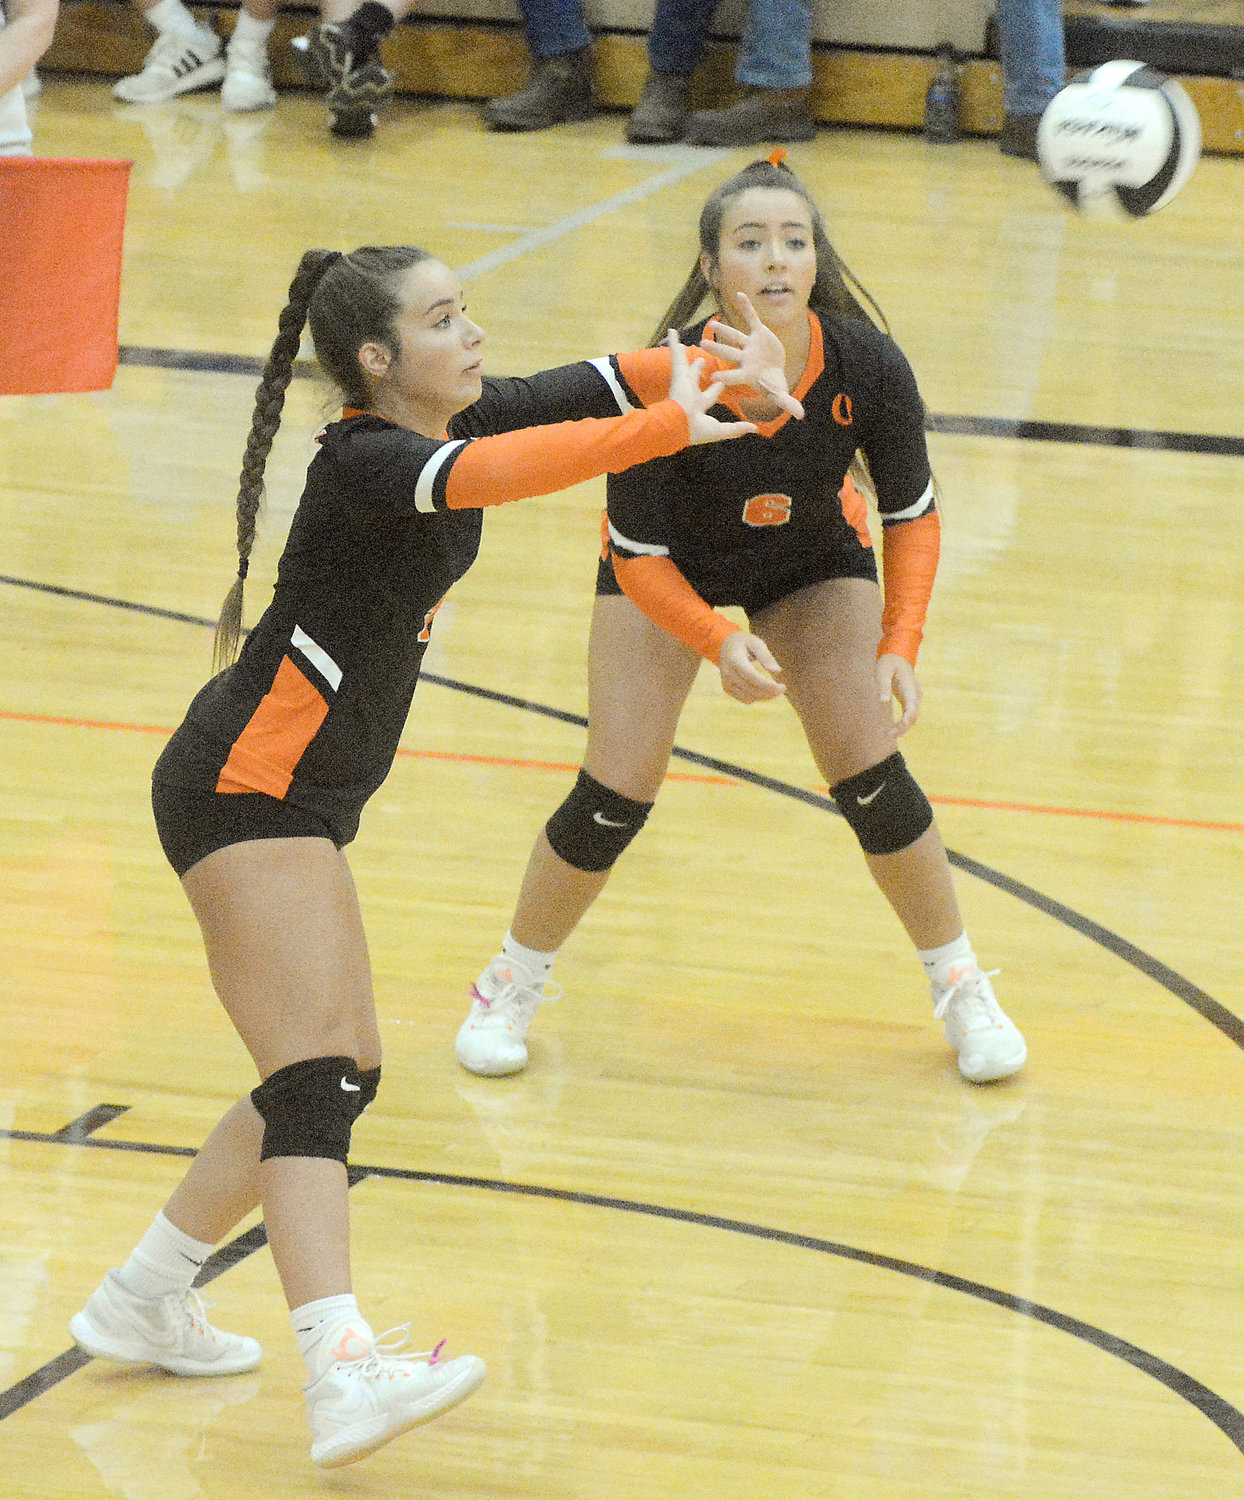 Keira Hendrix (above, left) pushes the volleyball towards the net while her twin sister Kyla Hendrix watches to see where it winds up during varsity action last Thursday against Fatima at Owensville High School.